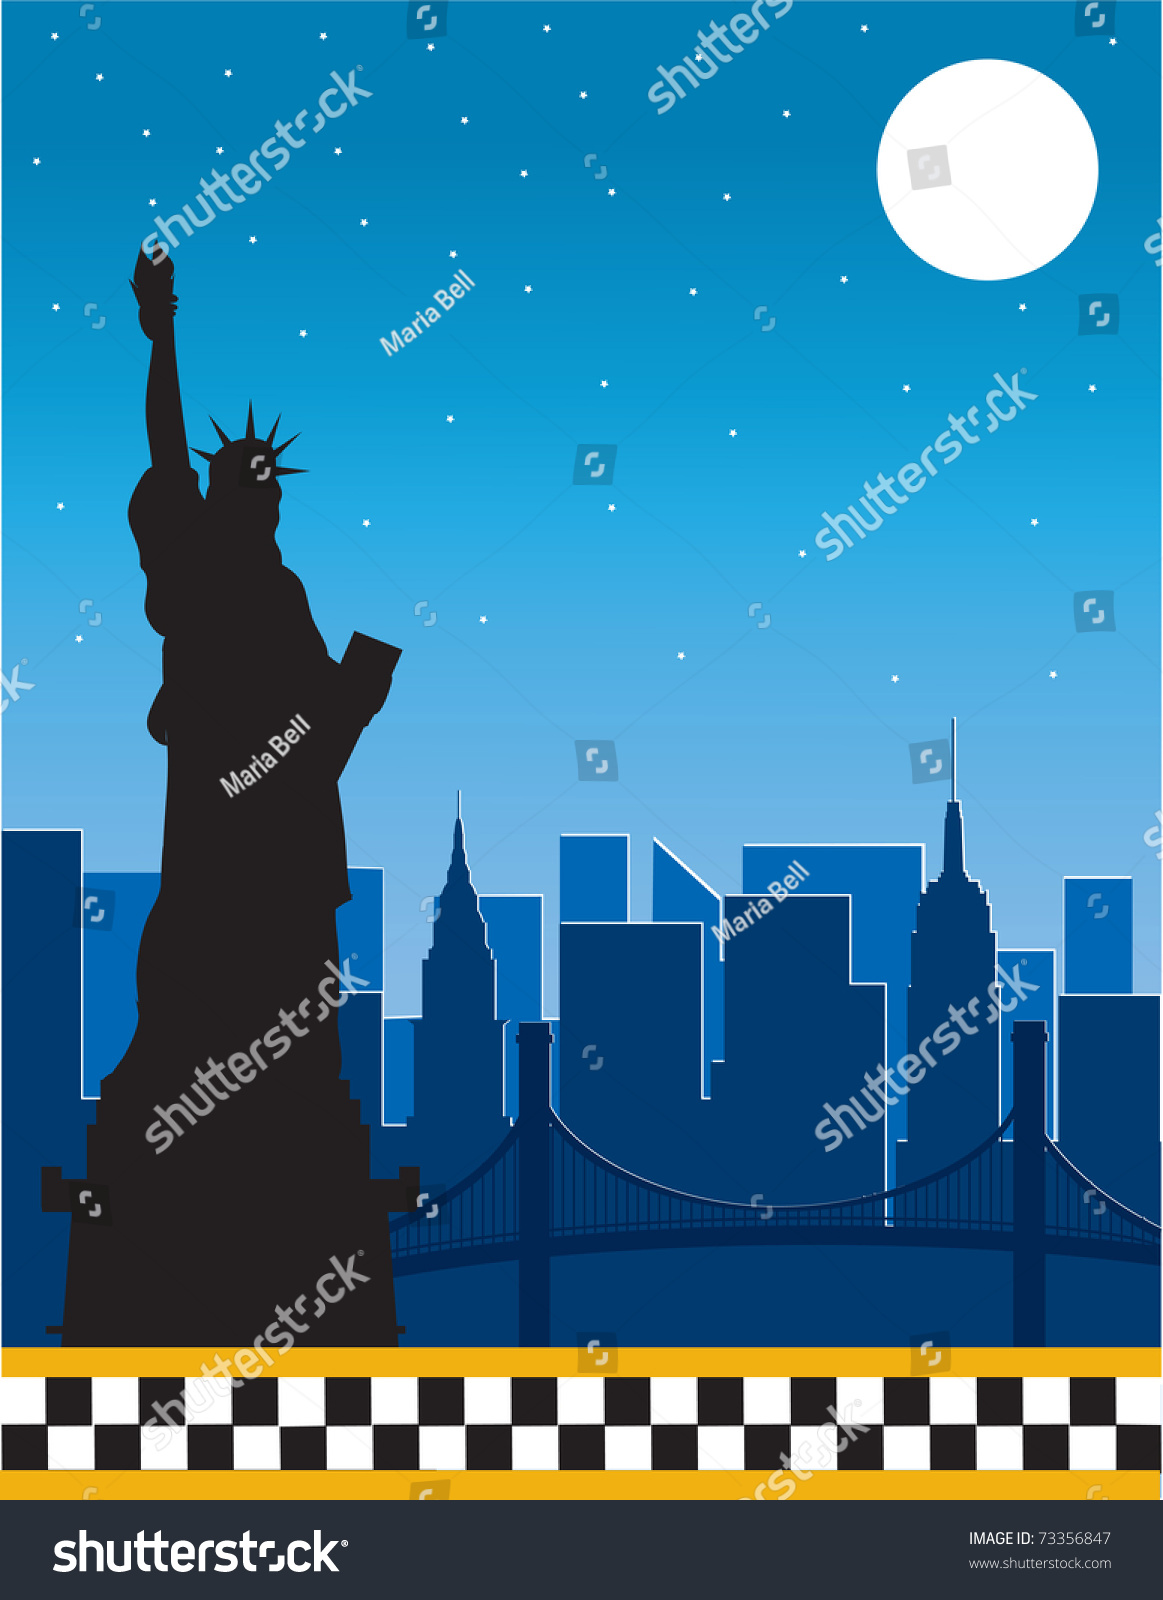 SVG of A border or frame featuring the New York skyline at night and a silhouette of the Statue of Liberty in the foreground.  The bottom border is the checkerboard of the New York City  taxi svg